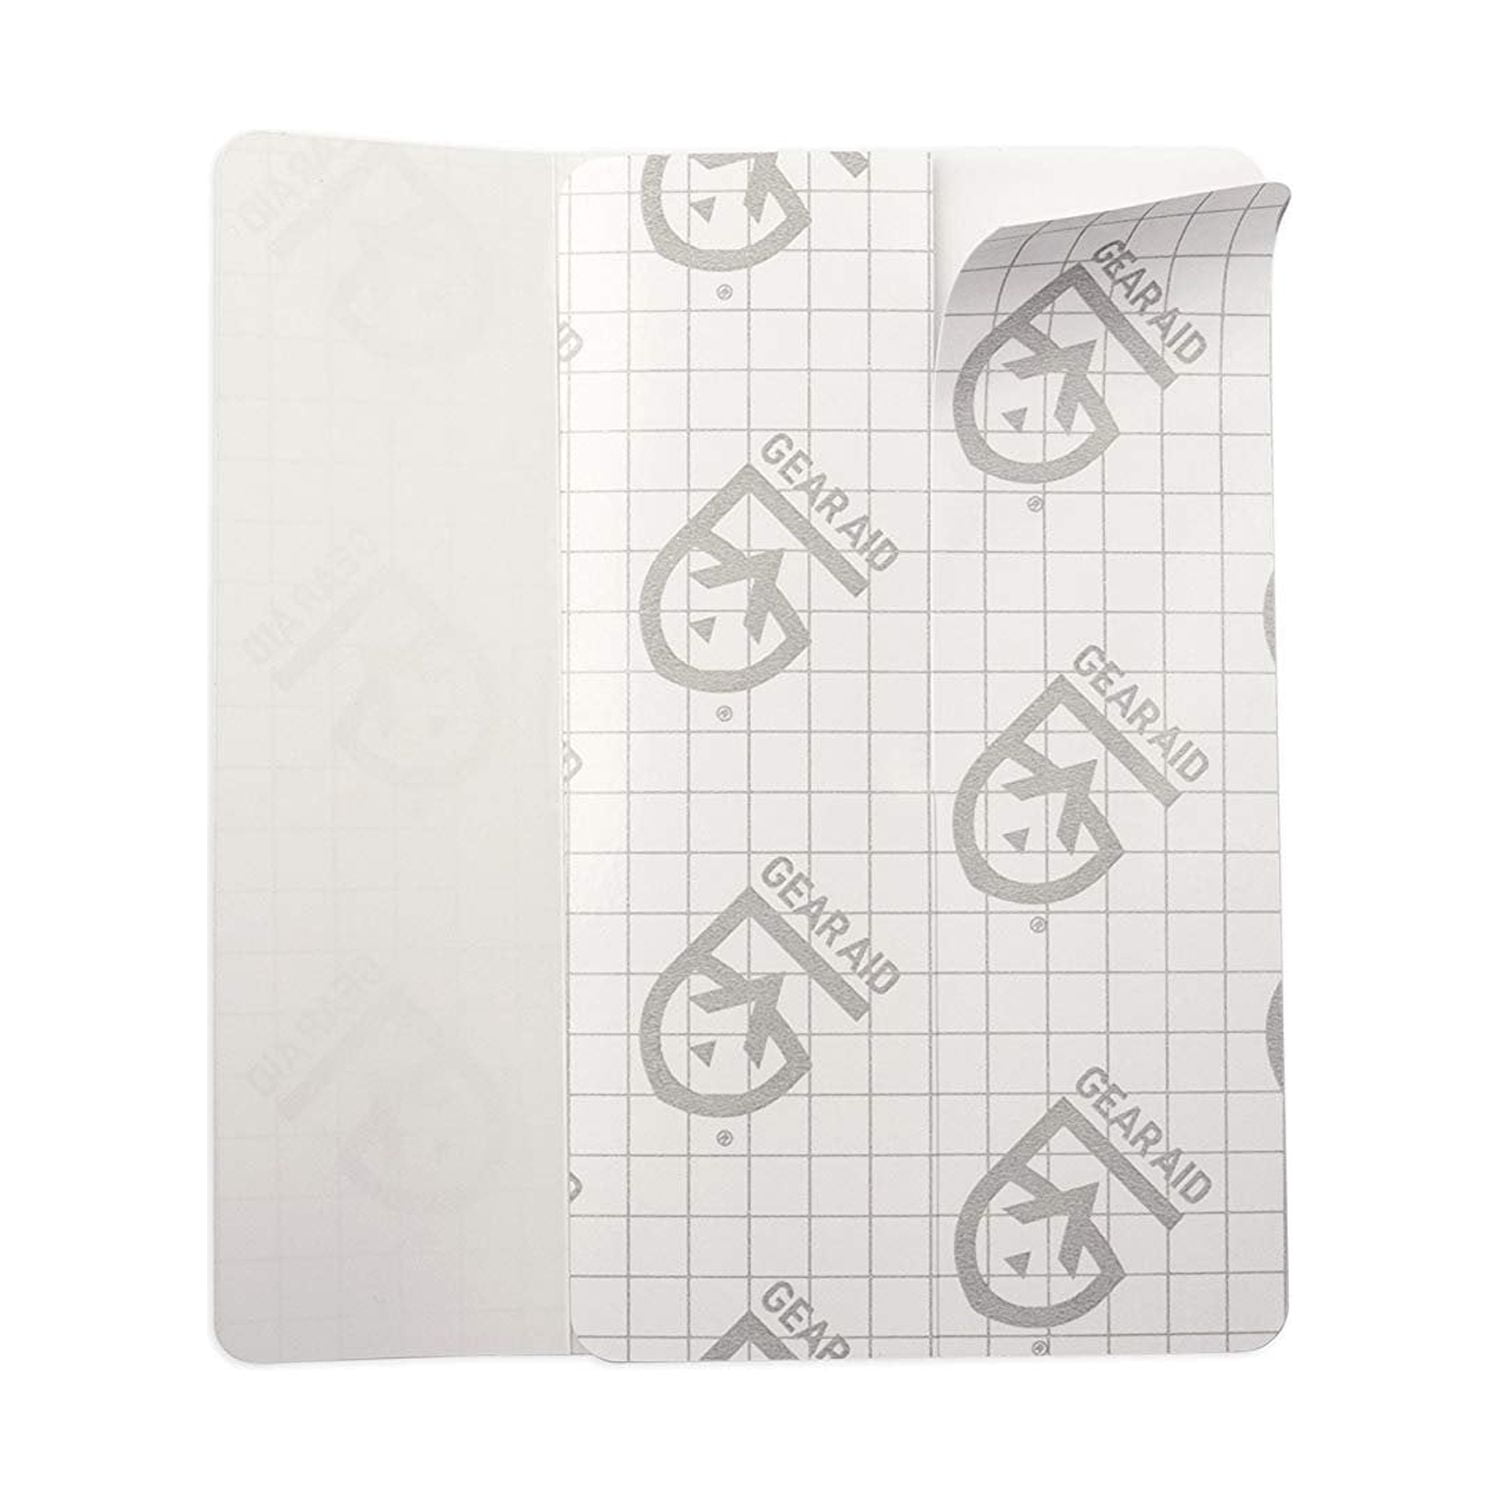 Gear Aid Tenacious Tape Patches - 10800